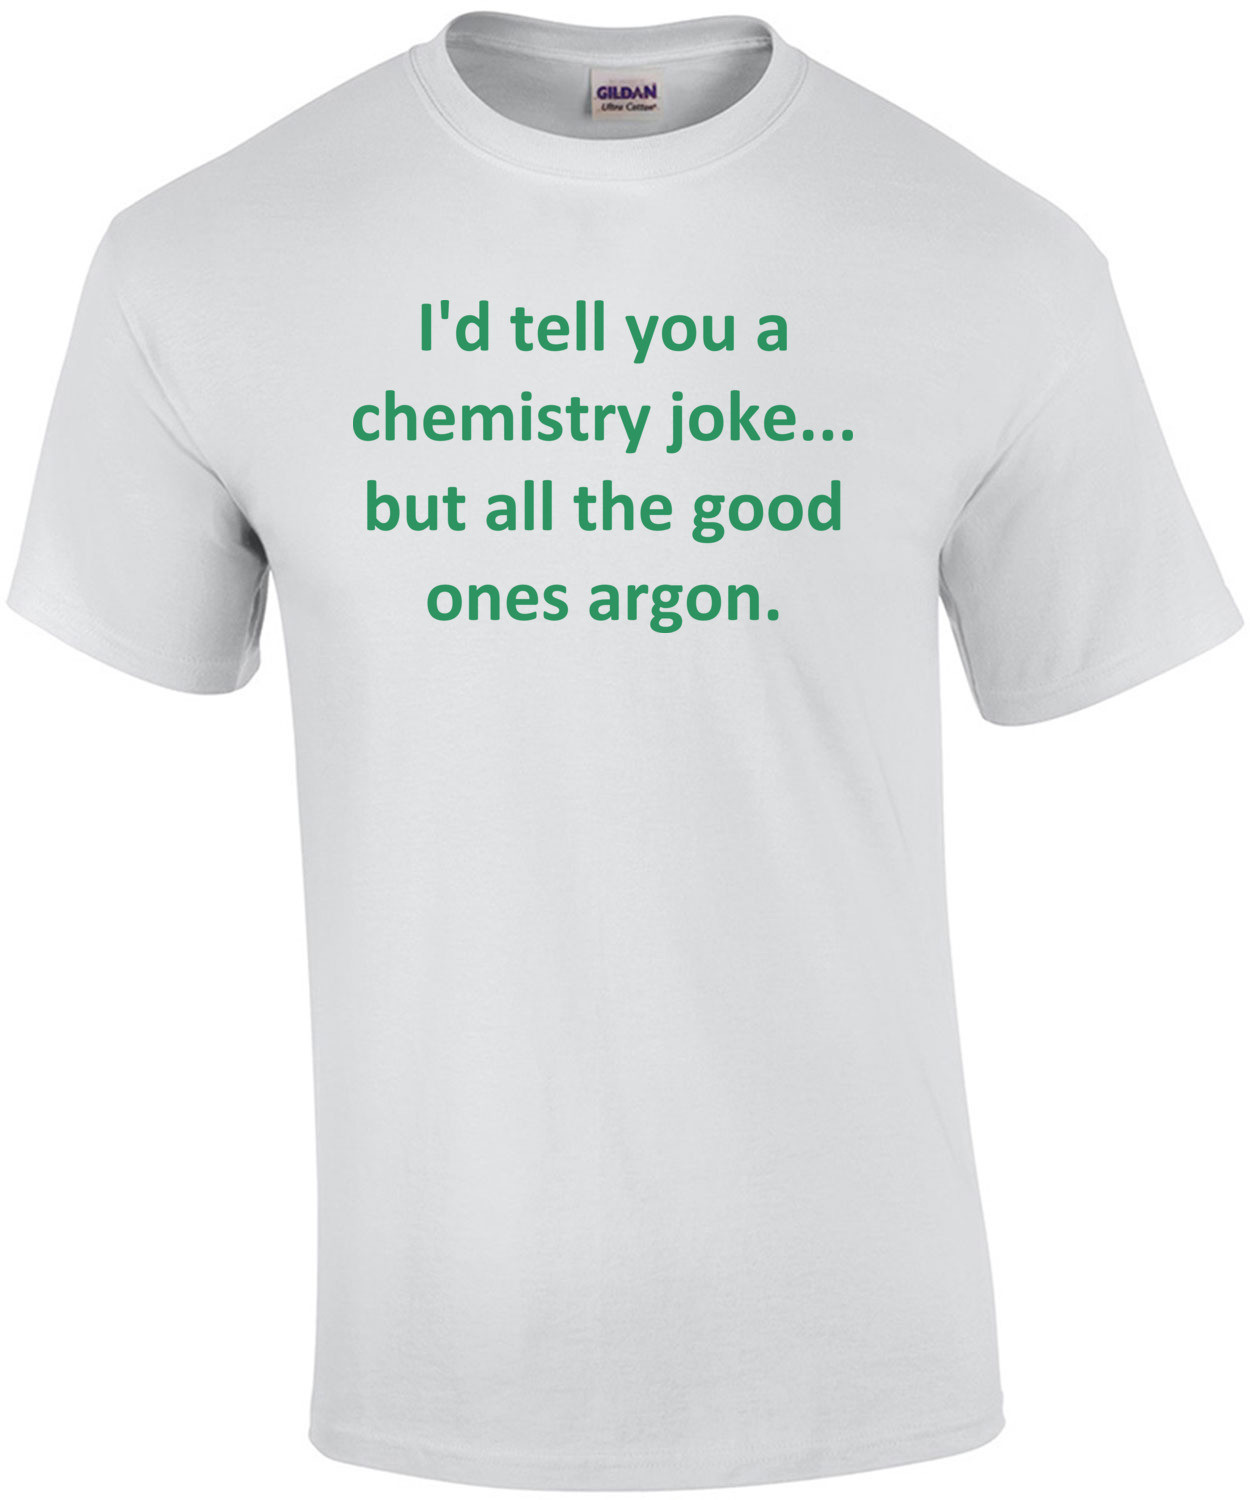 I'd tell you a chemistry joke... but all the good ones argon. Funny Chemistry T-Shirt Shirt